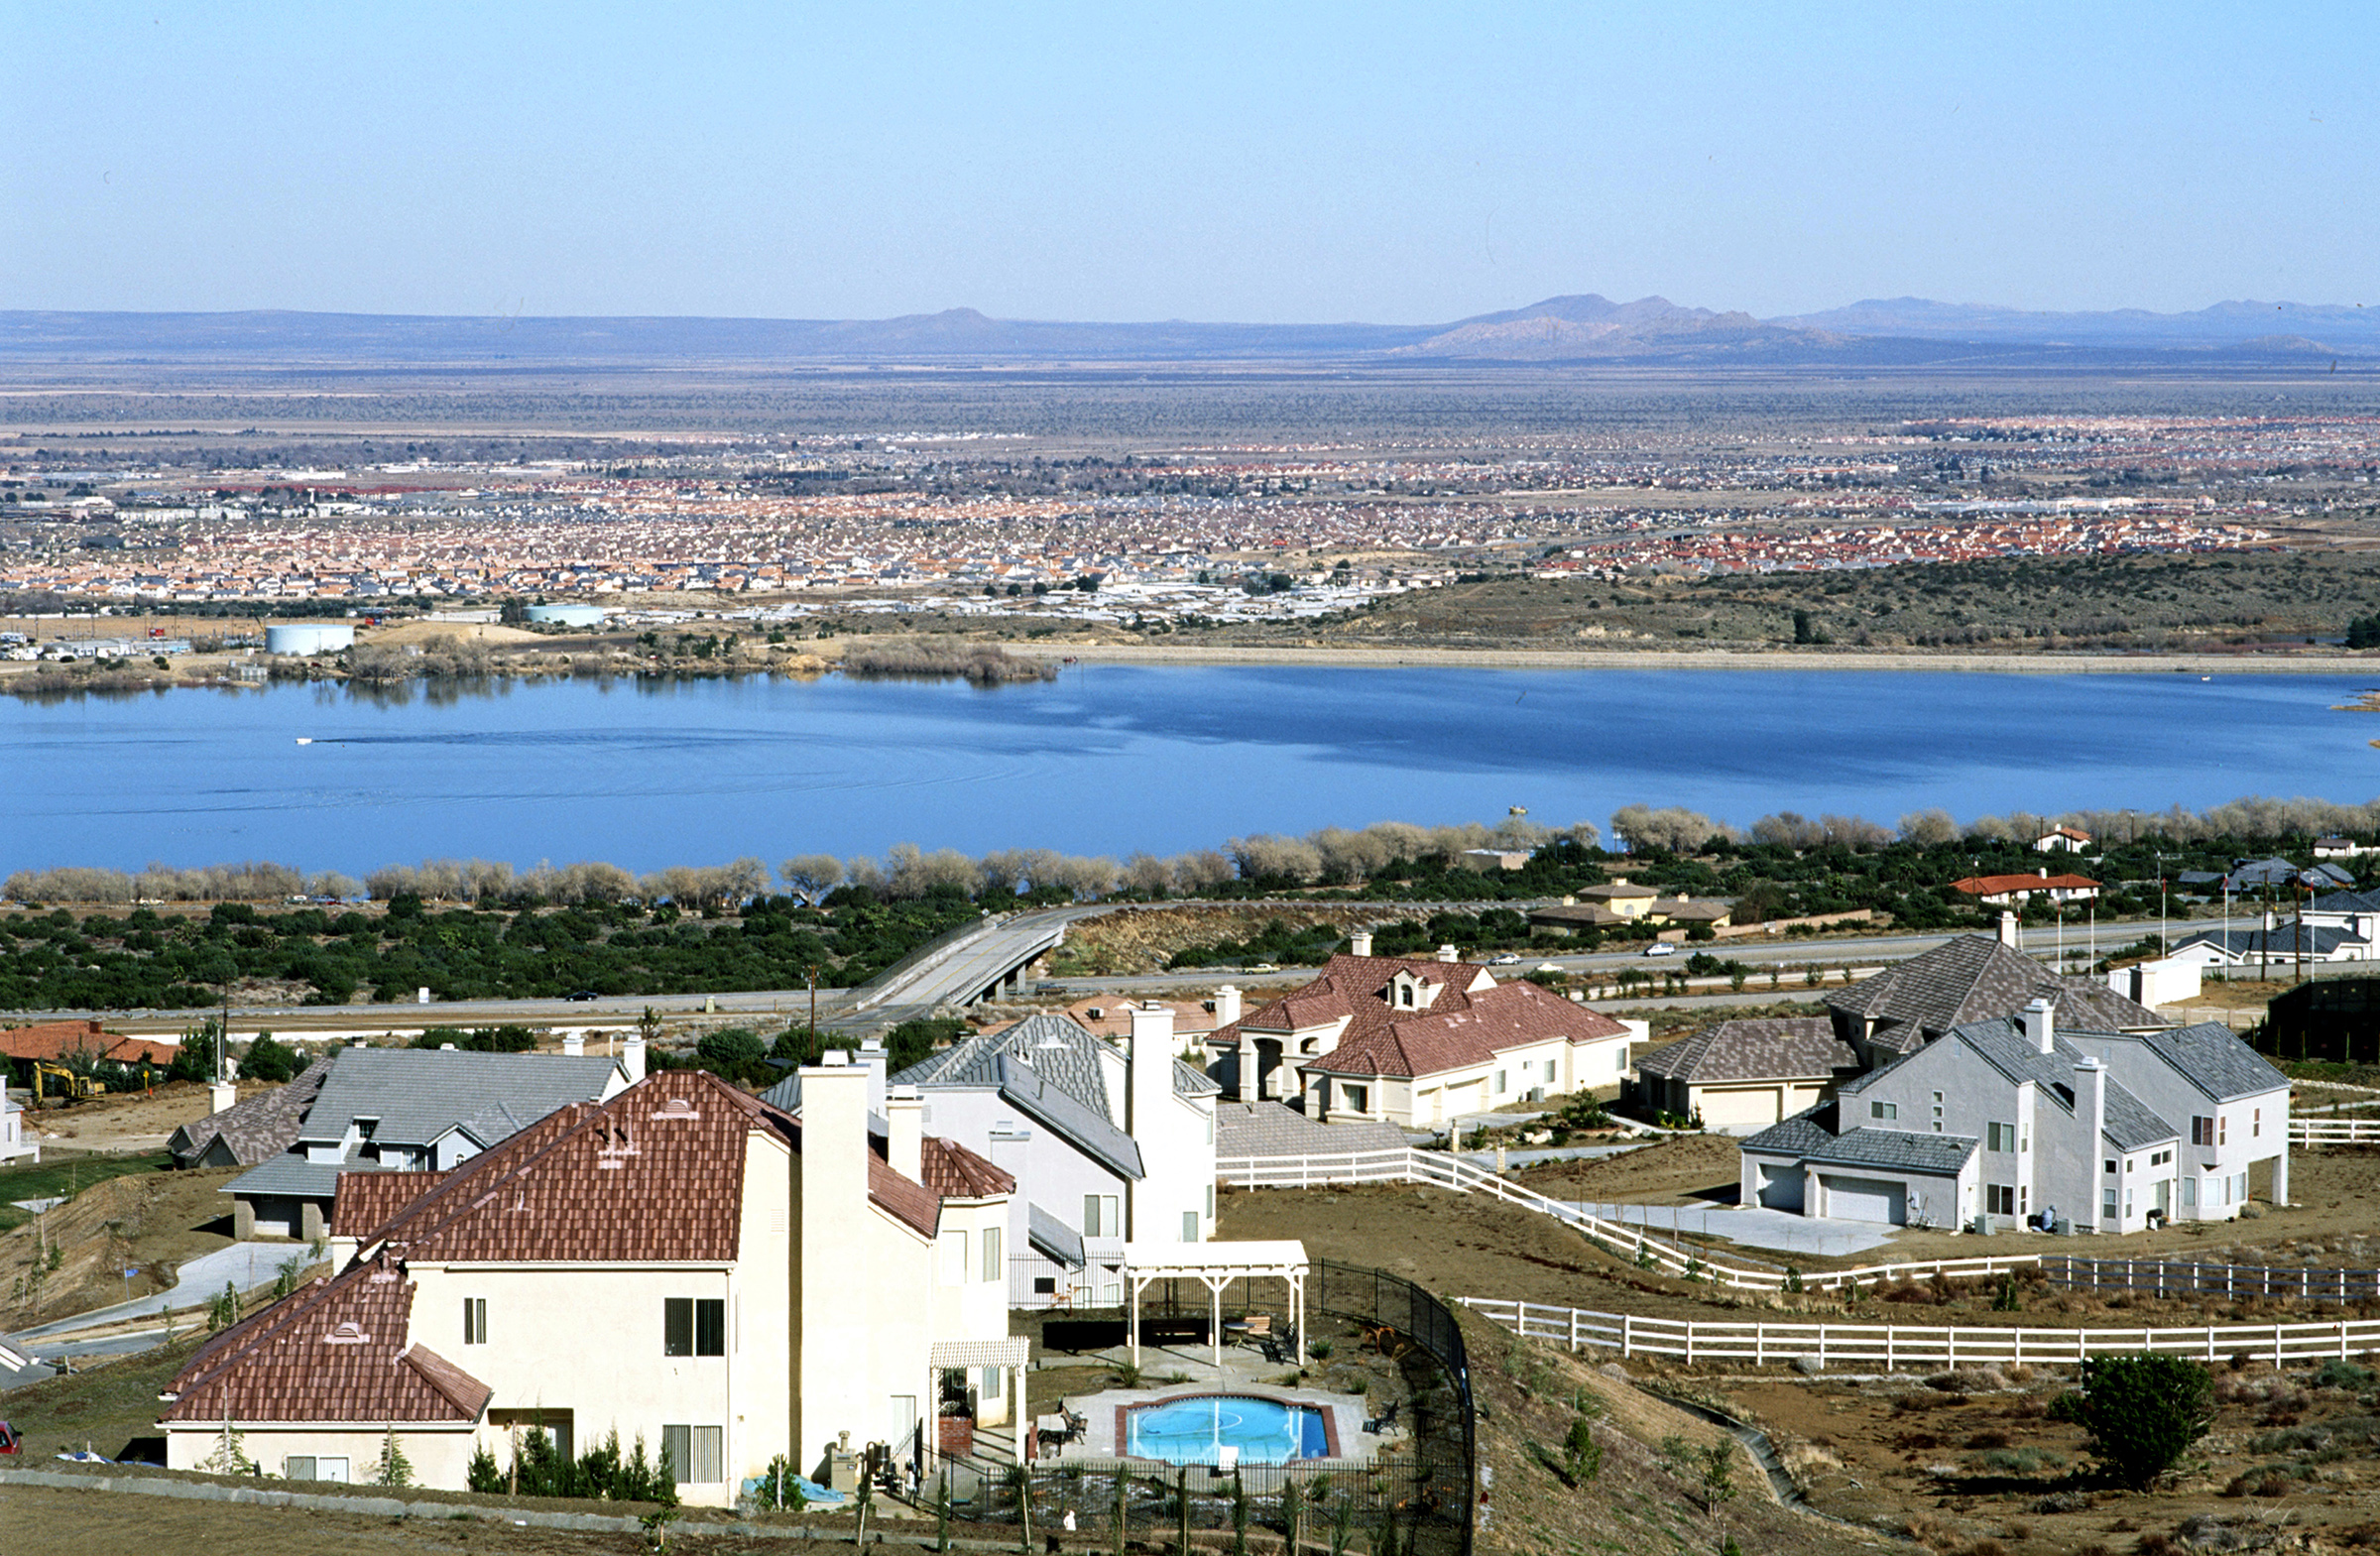 Image of the City of Palmdale